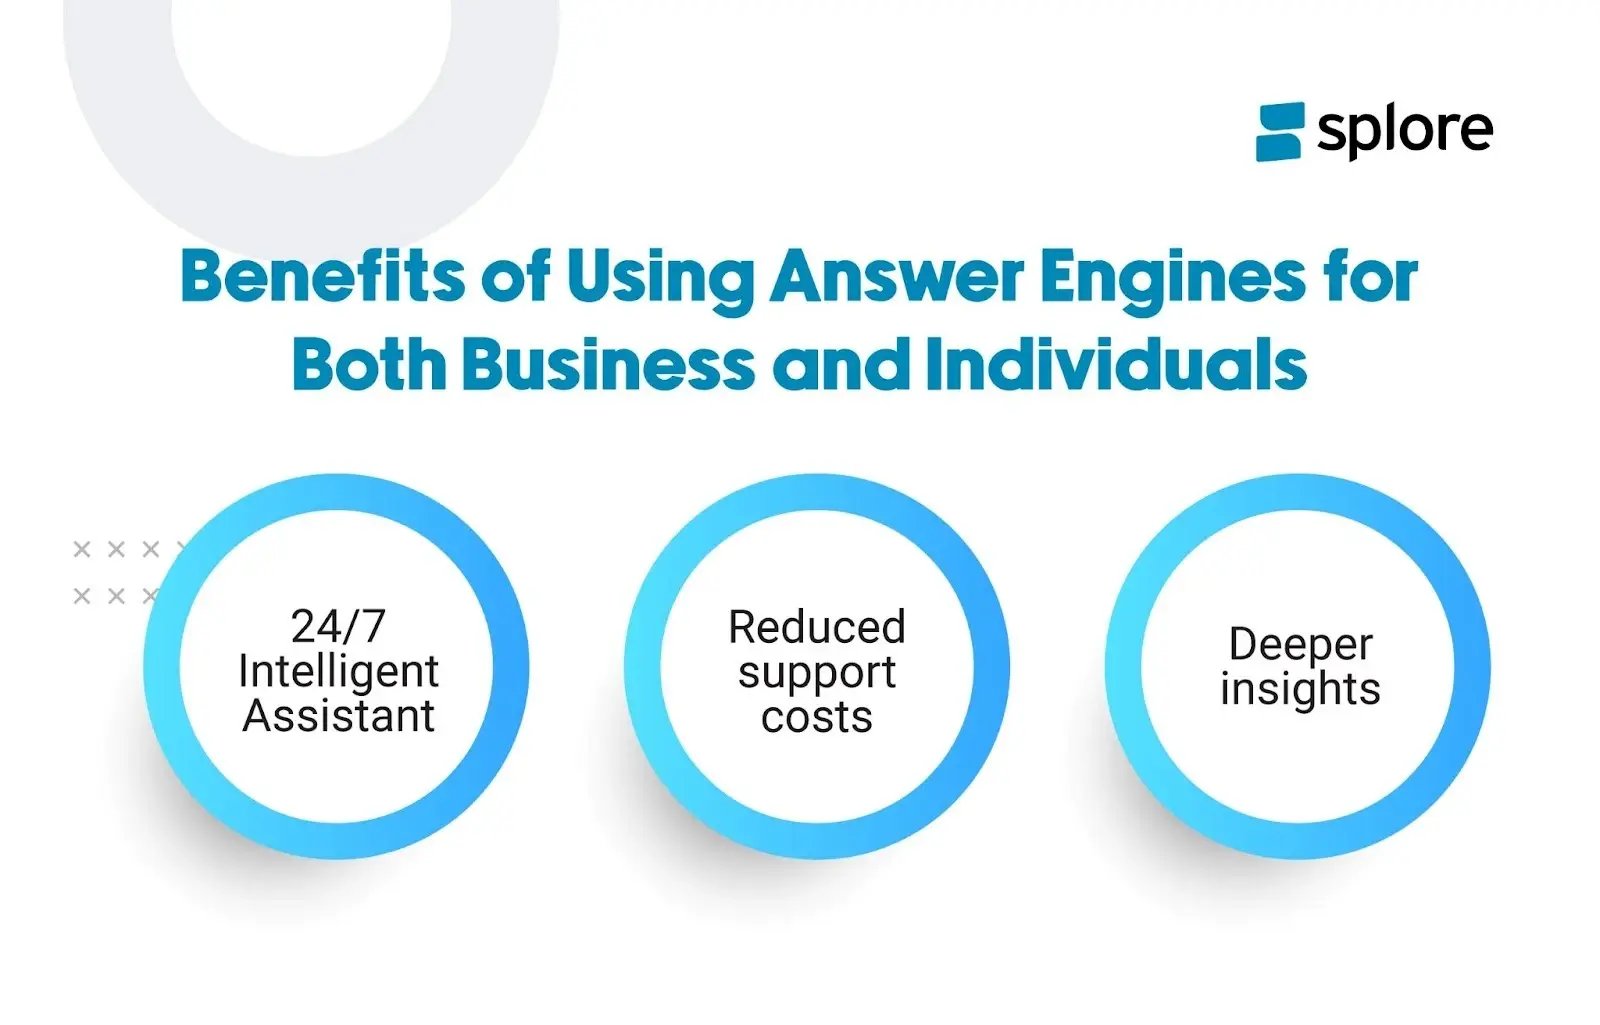 Benefits of Using Answer Engines for Both Business and Individulas